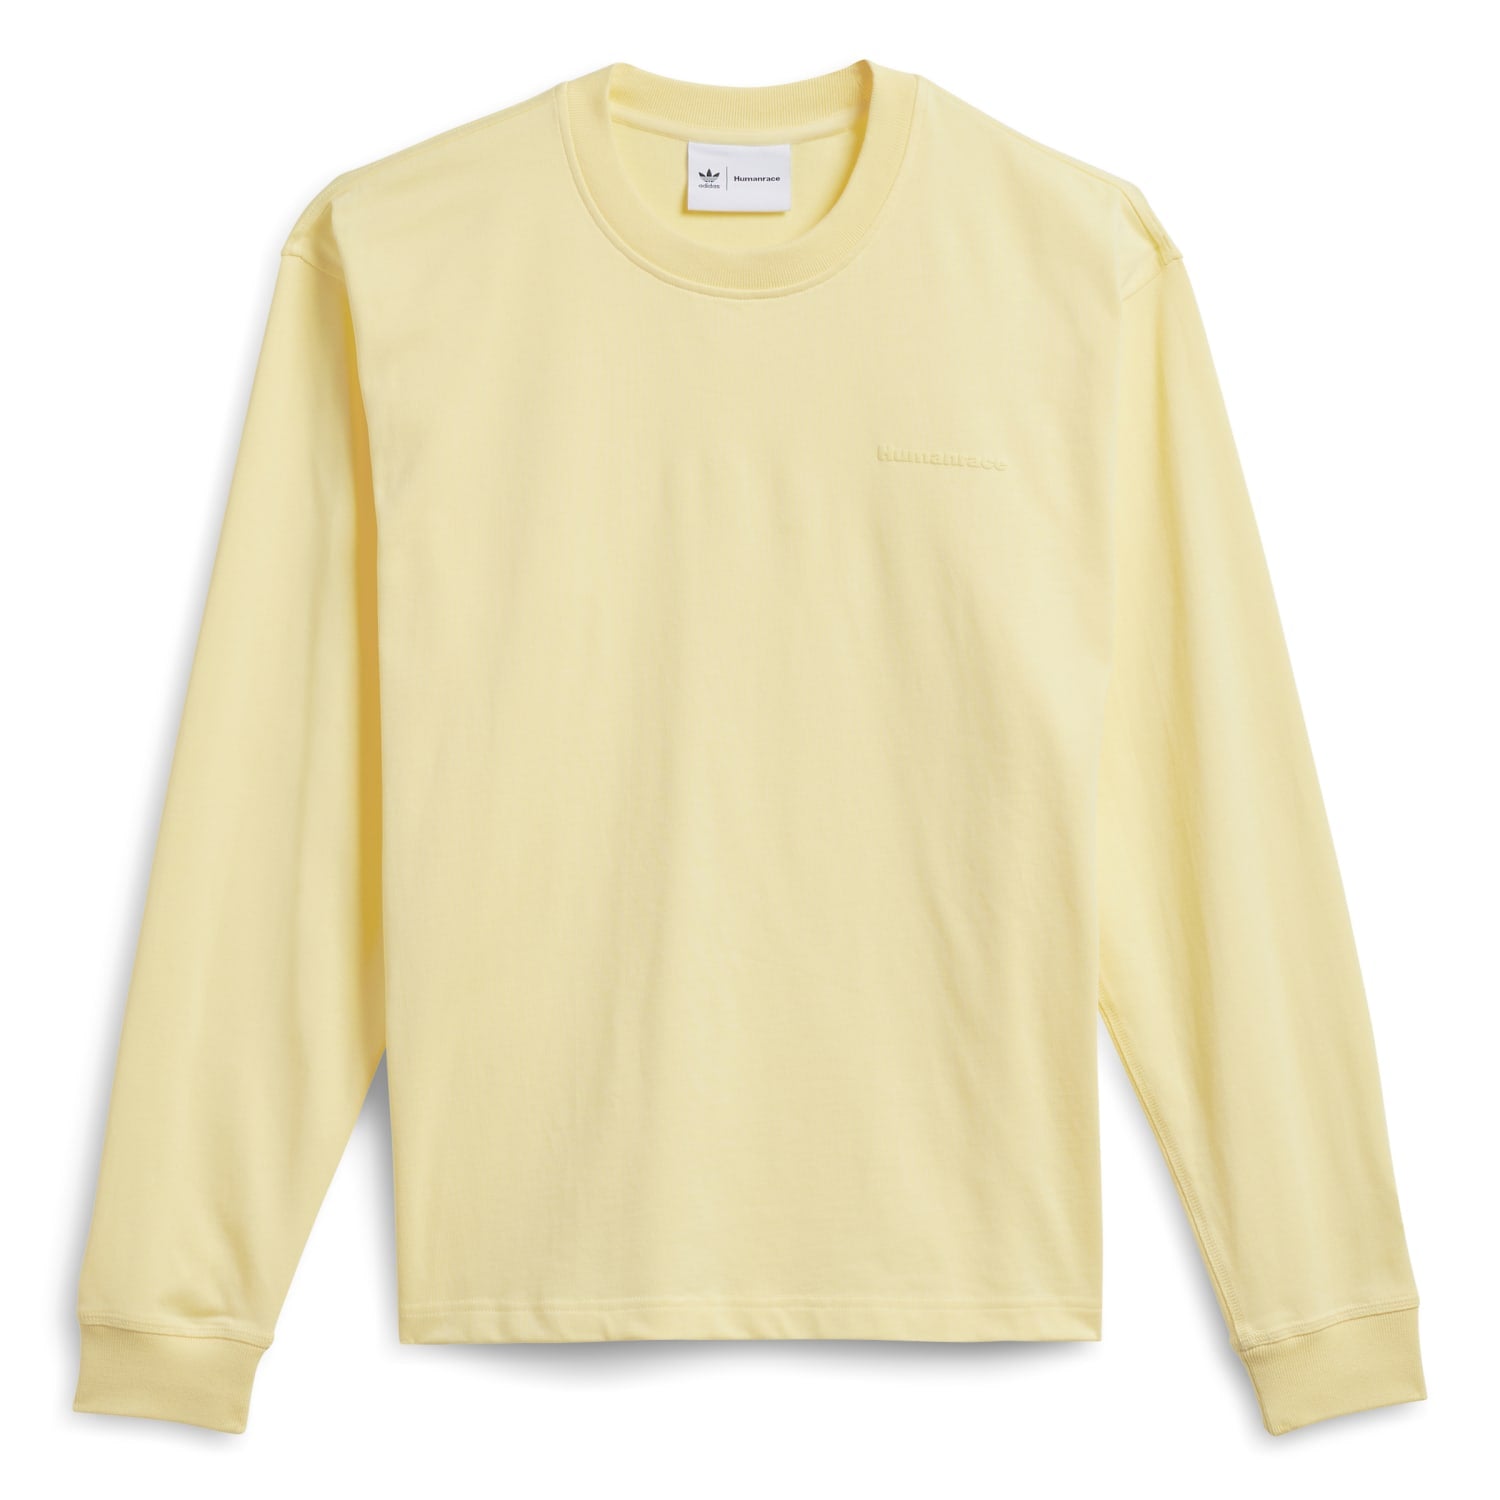 Adidas Unisex PW Basics L Tee Almost Yellow H47013 - T-SHIRTS - Canada